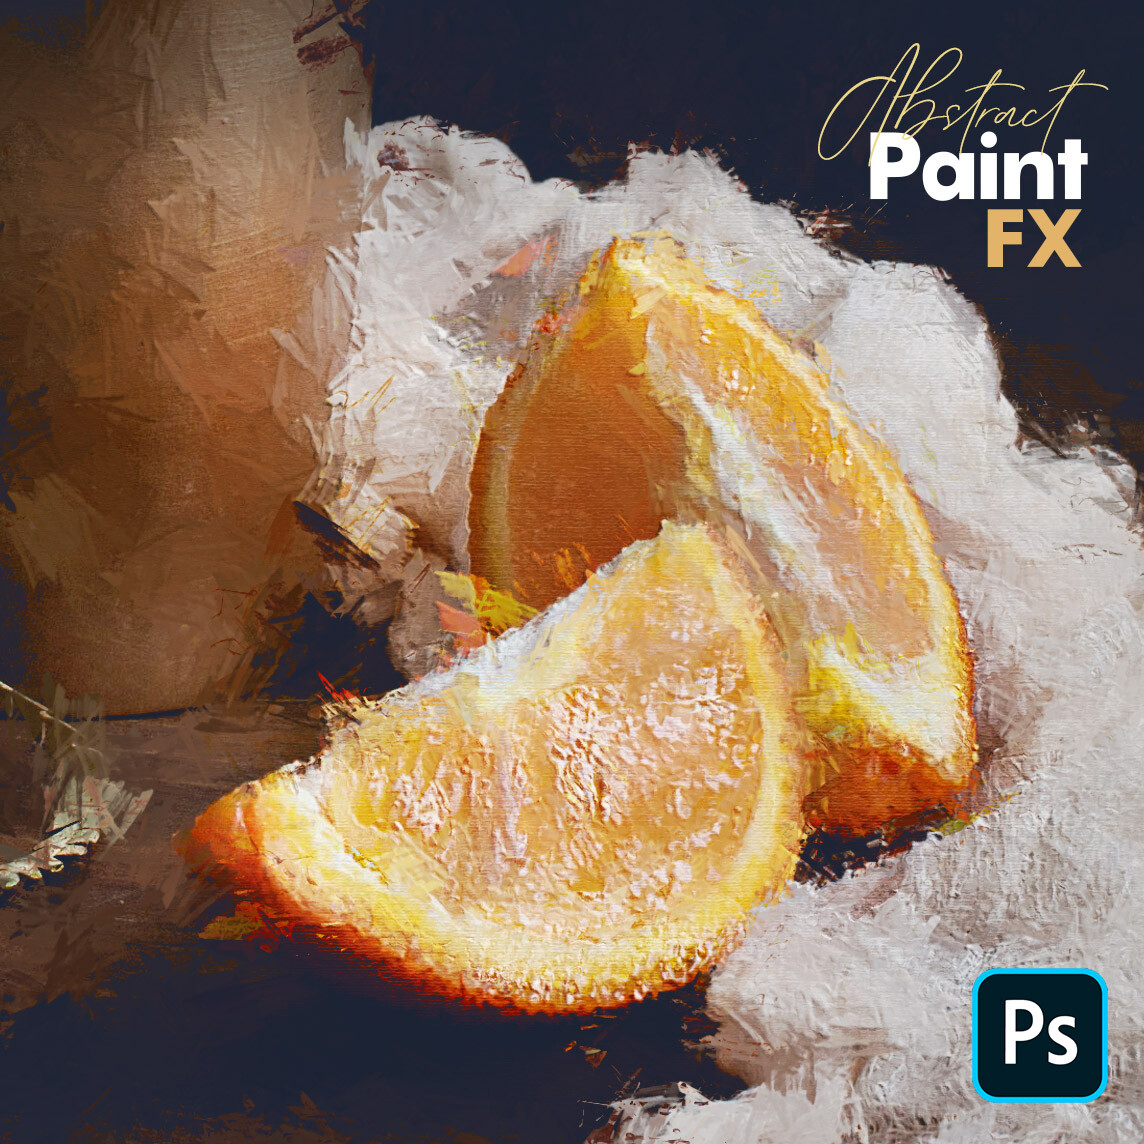 abstract paint fx - photoshop plugin free download